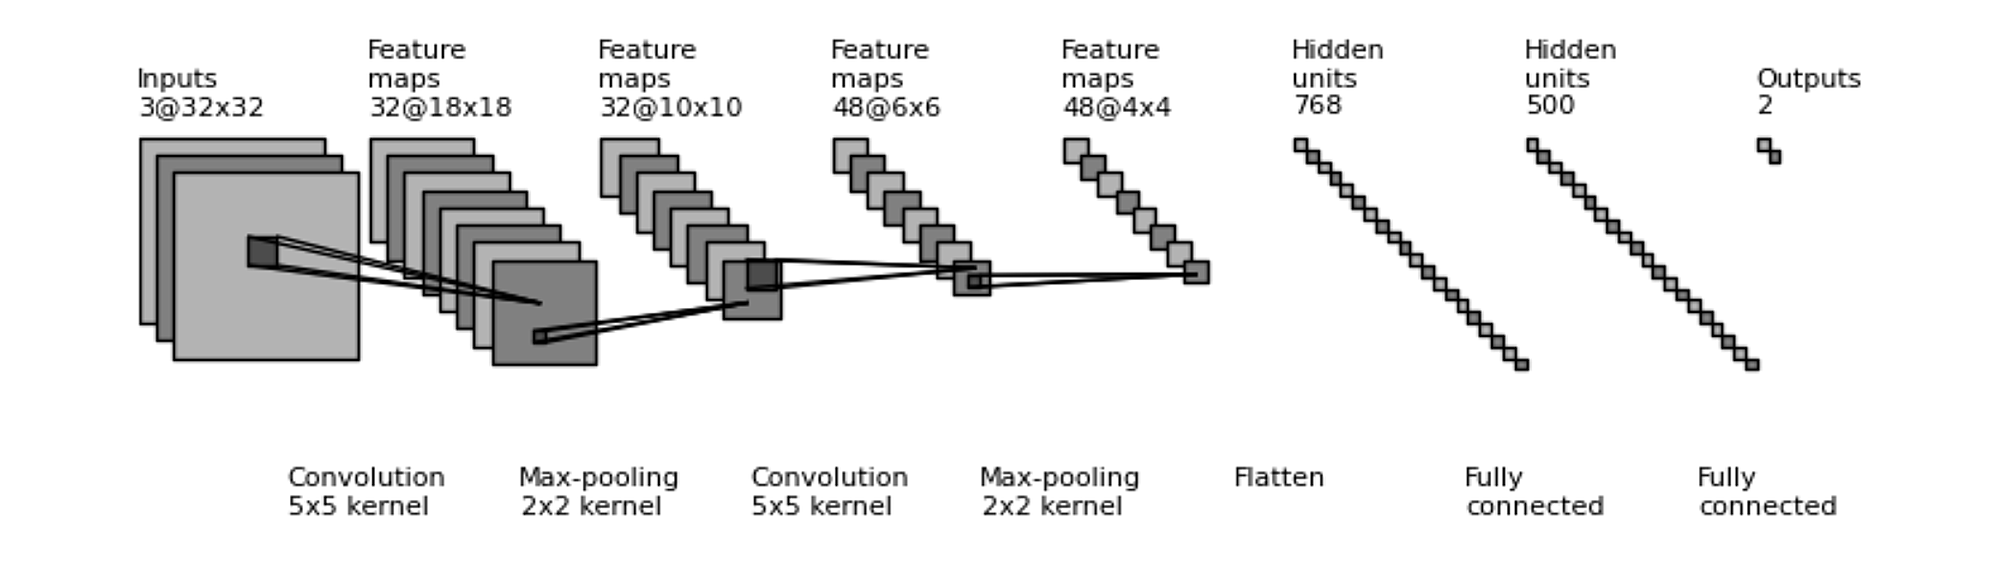 Diagram of simple CNN utilized to curate computer vision data.